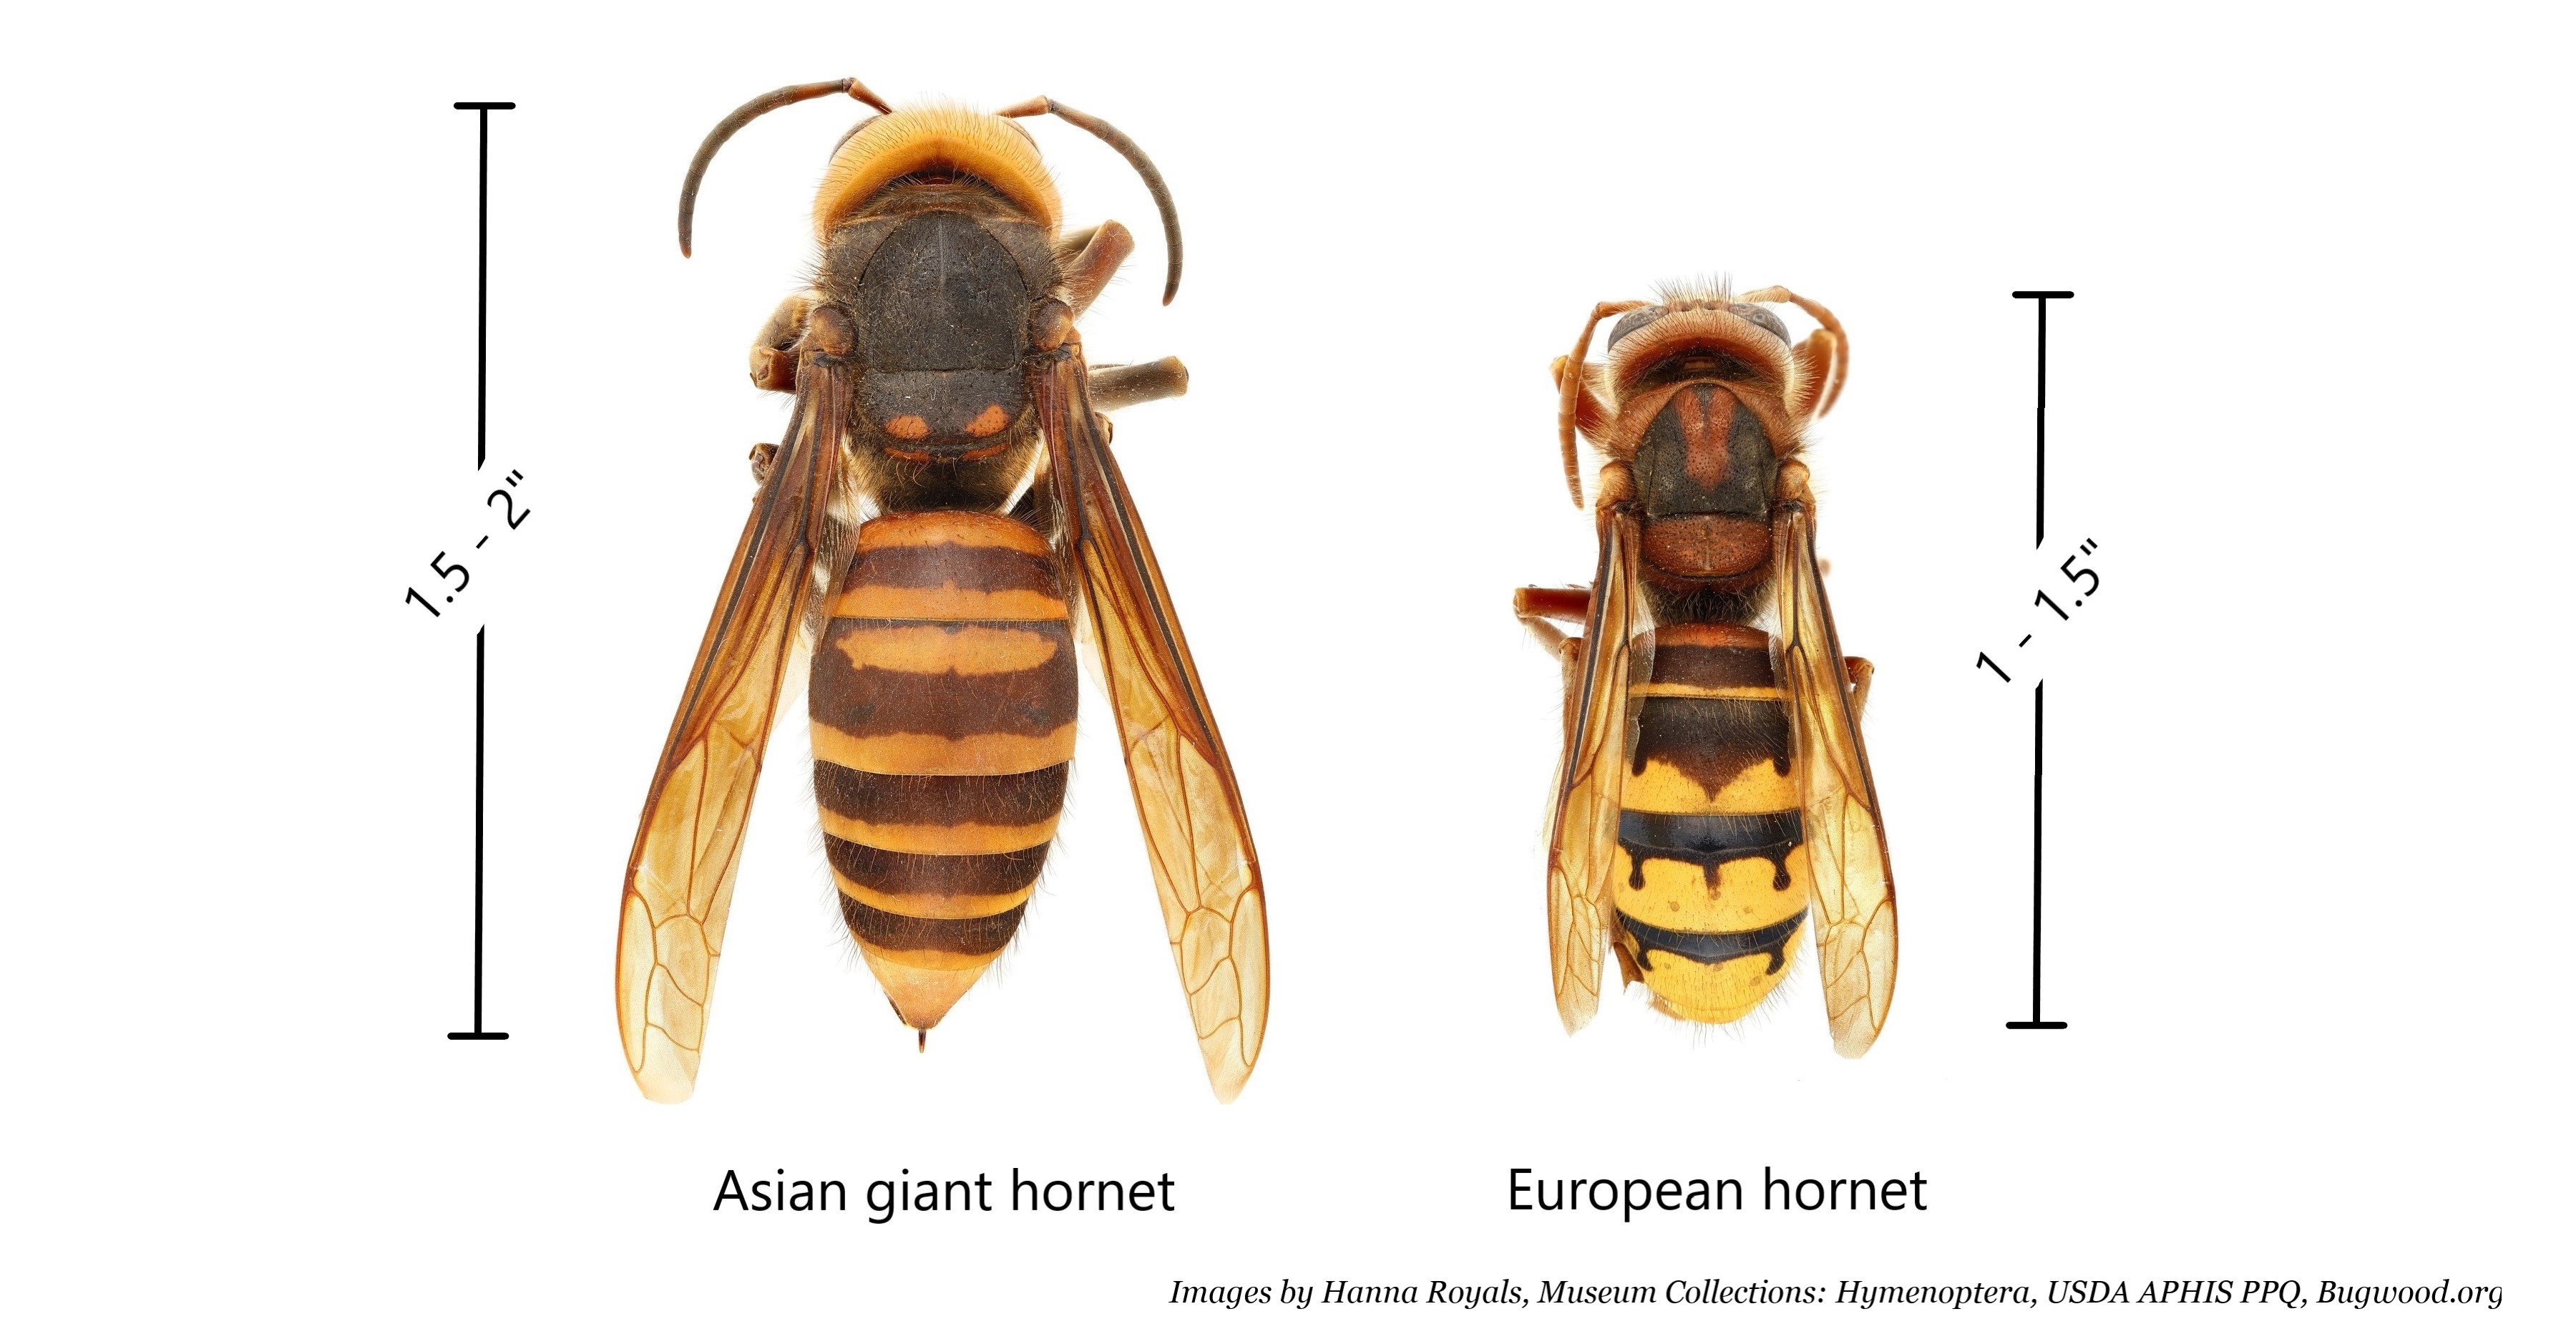 image of Asian giant hornet and European hornet by Hanna Royals, Museum Collections: Hymenoptera, USDA APHIS PPQ, Bugwood.org;